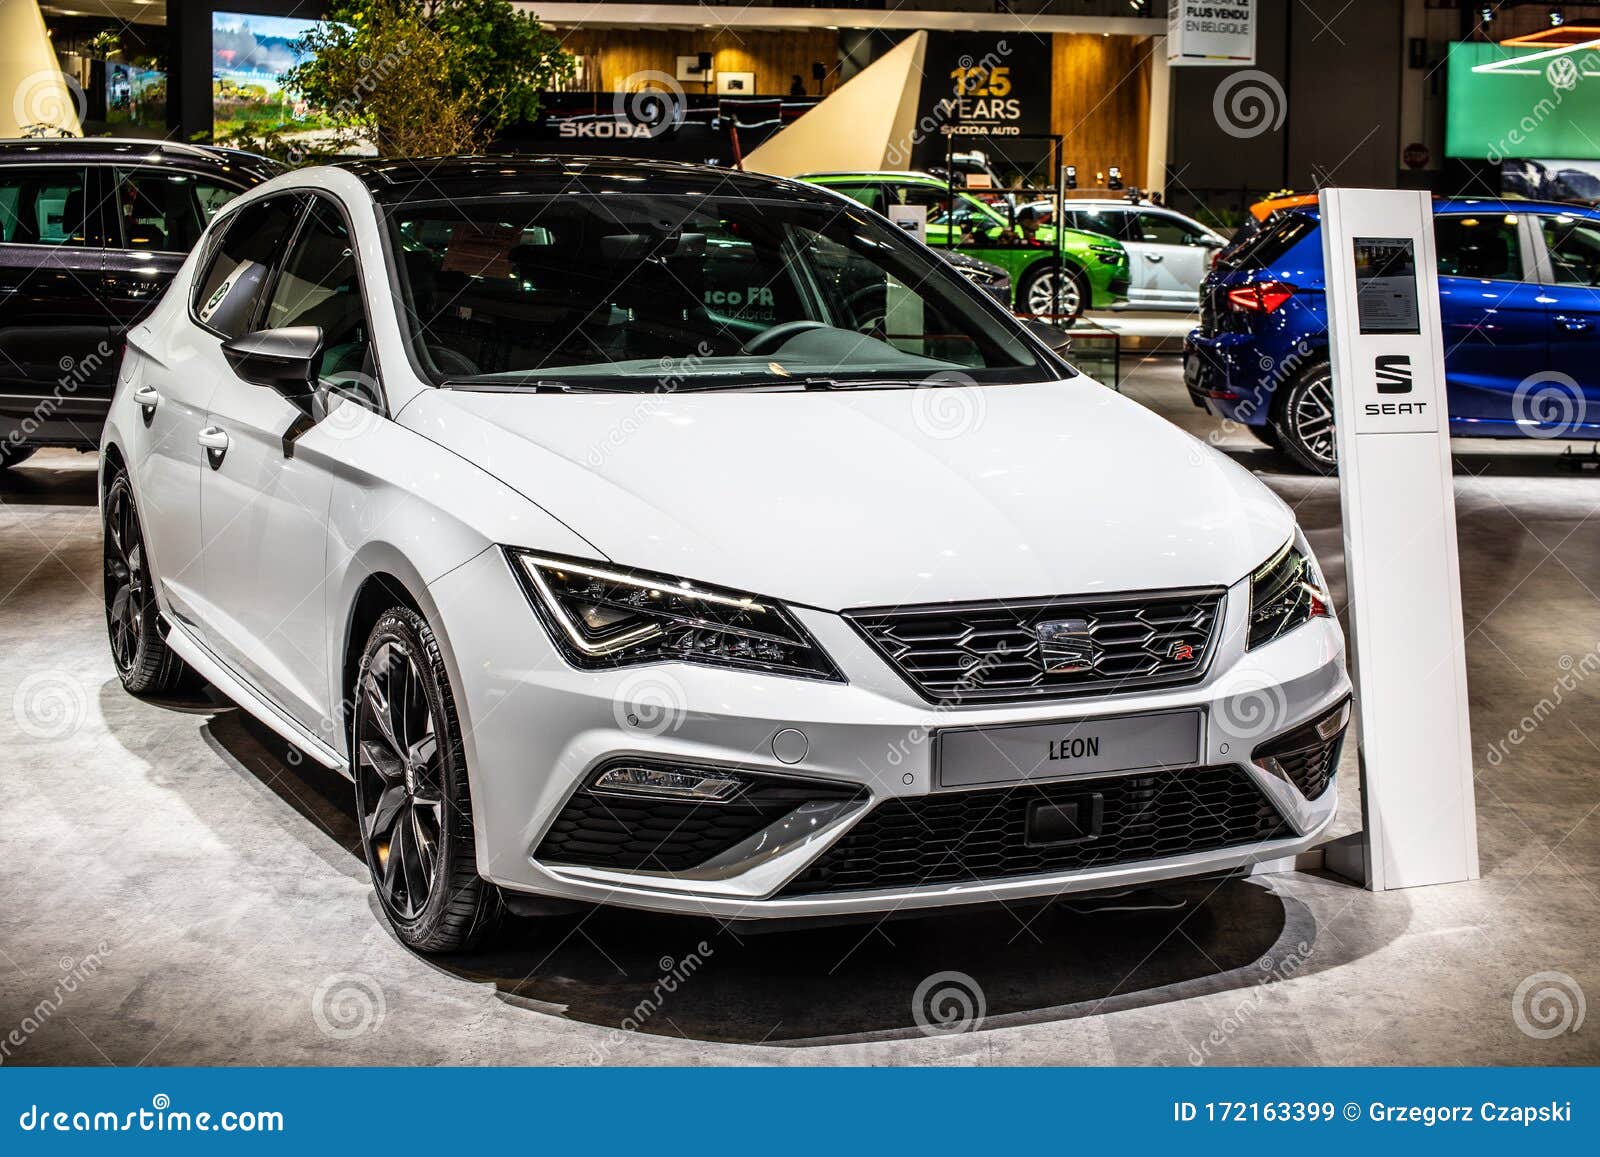 SEAT Leon Style, A safe compact car